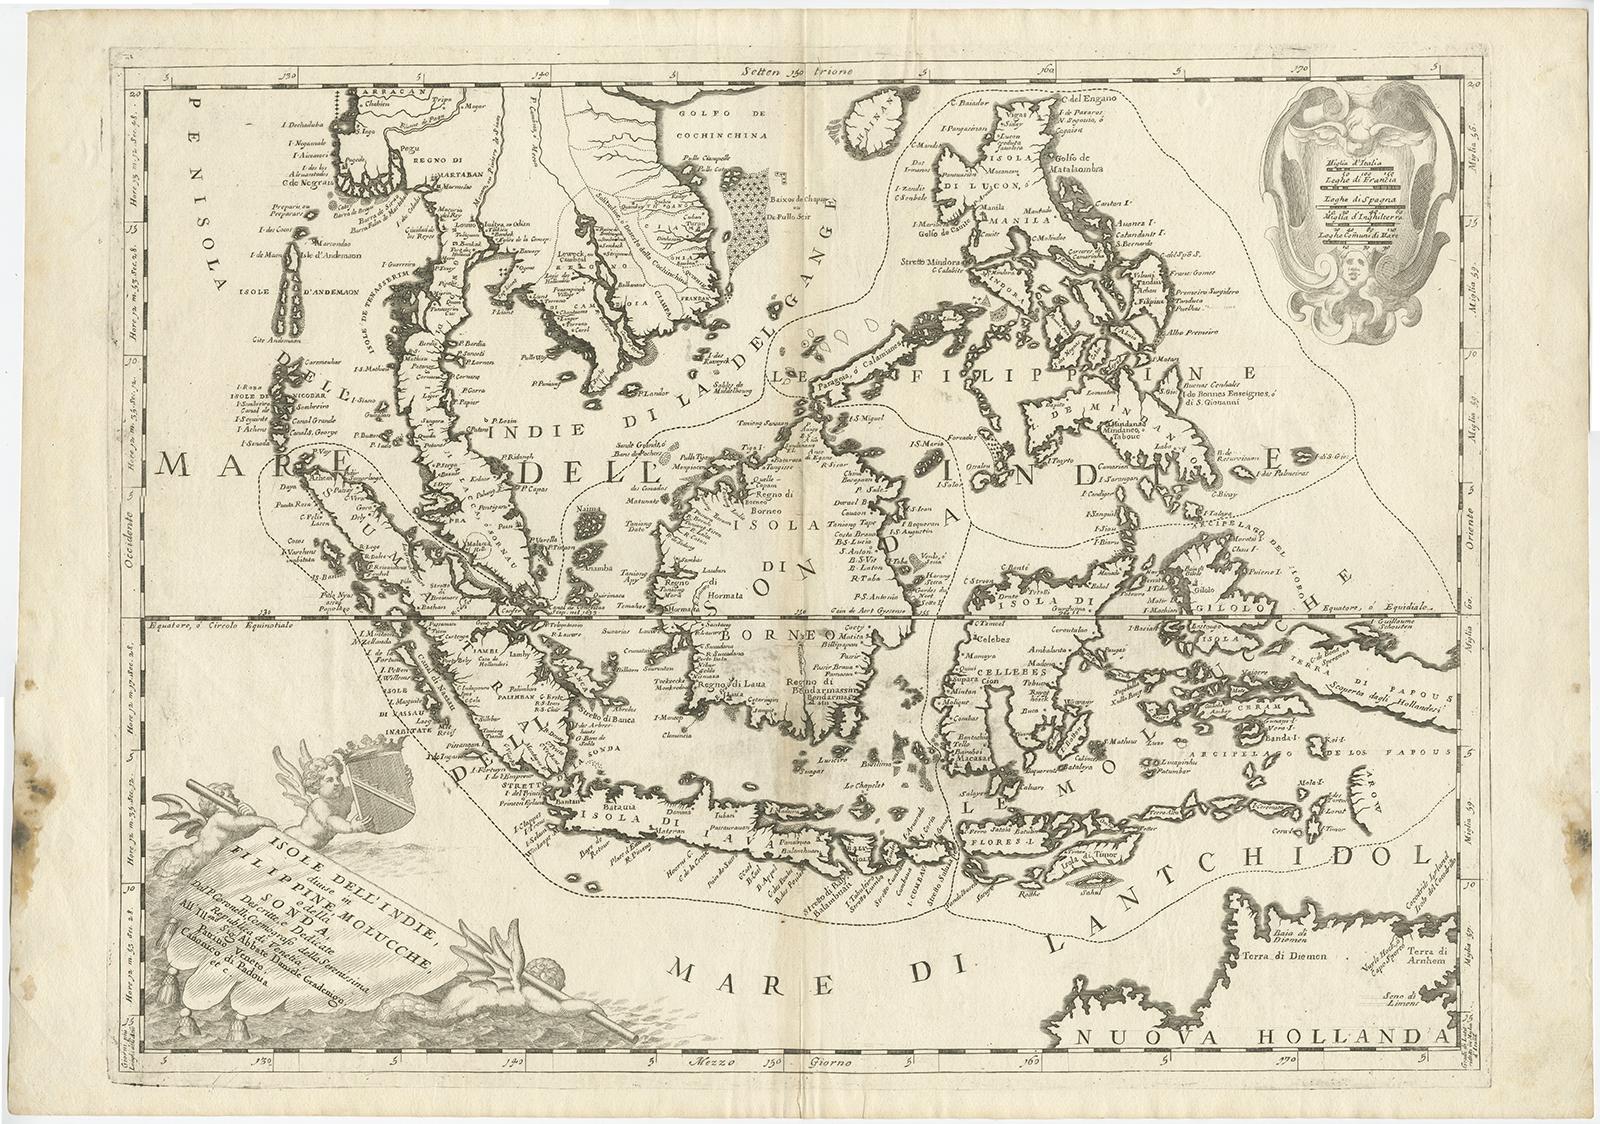 Antique map titled 'Isole dell' Indie, diuise in Filippine, Molucche e della Sonda'. 

Old map of the Philippines, Malaysia, Indonesia, Singapore, Northern Australia and contiguous islands. Ornamental cartouche at lower left with title on drape,